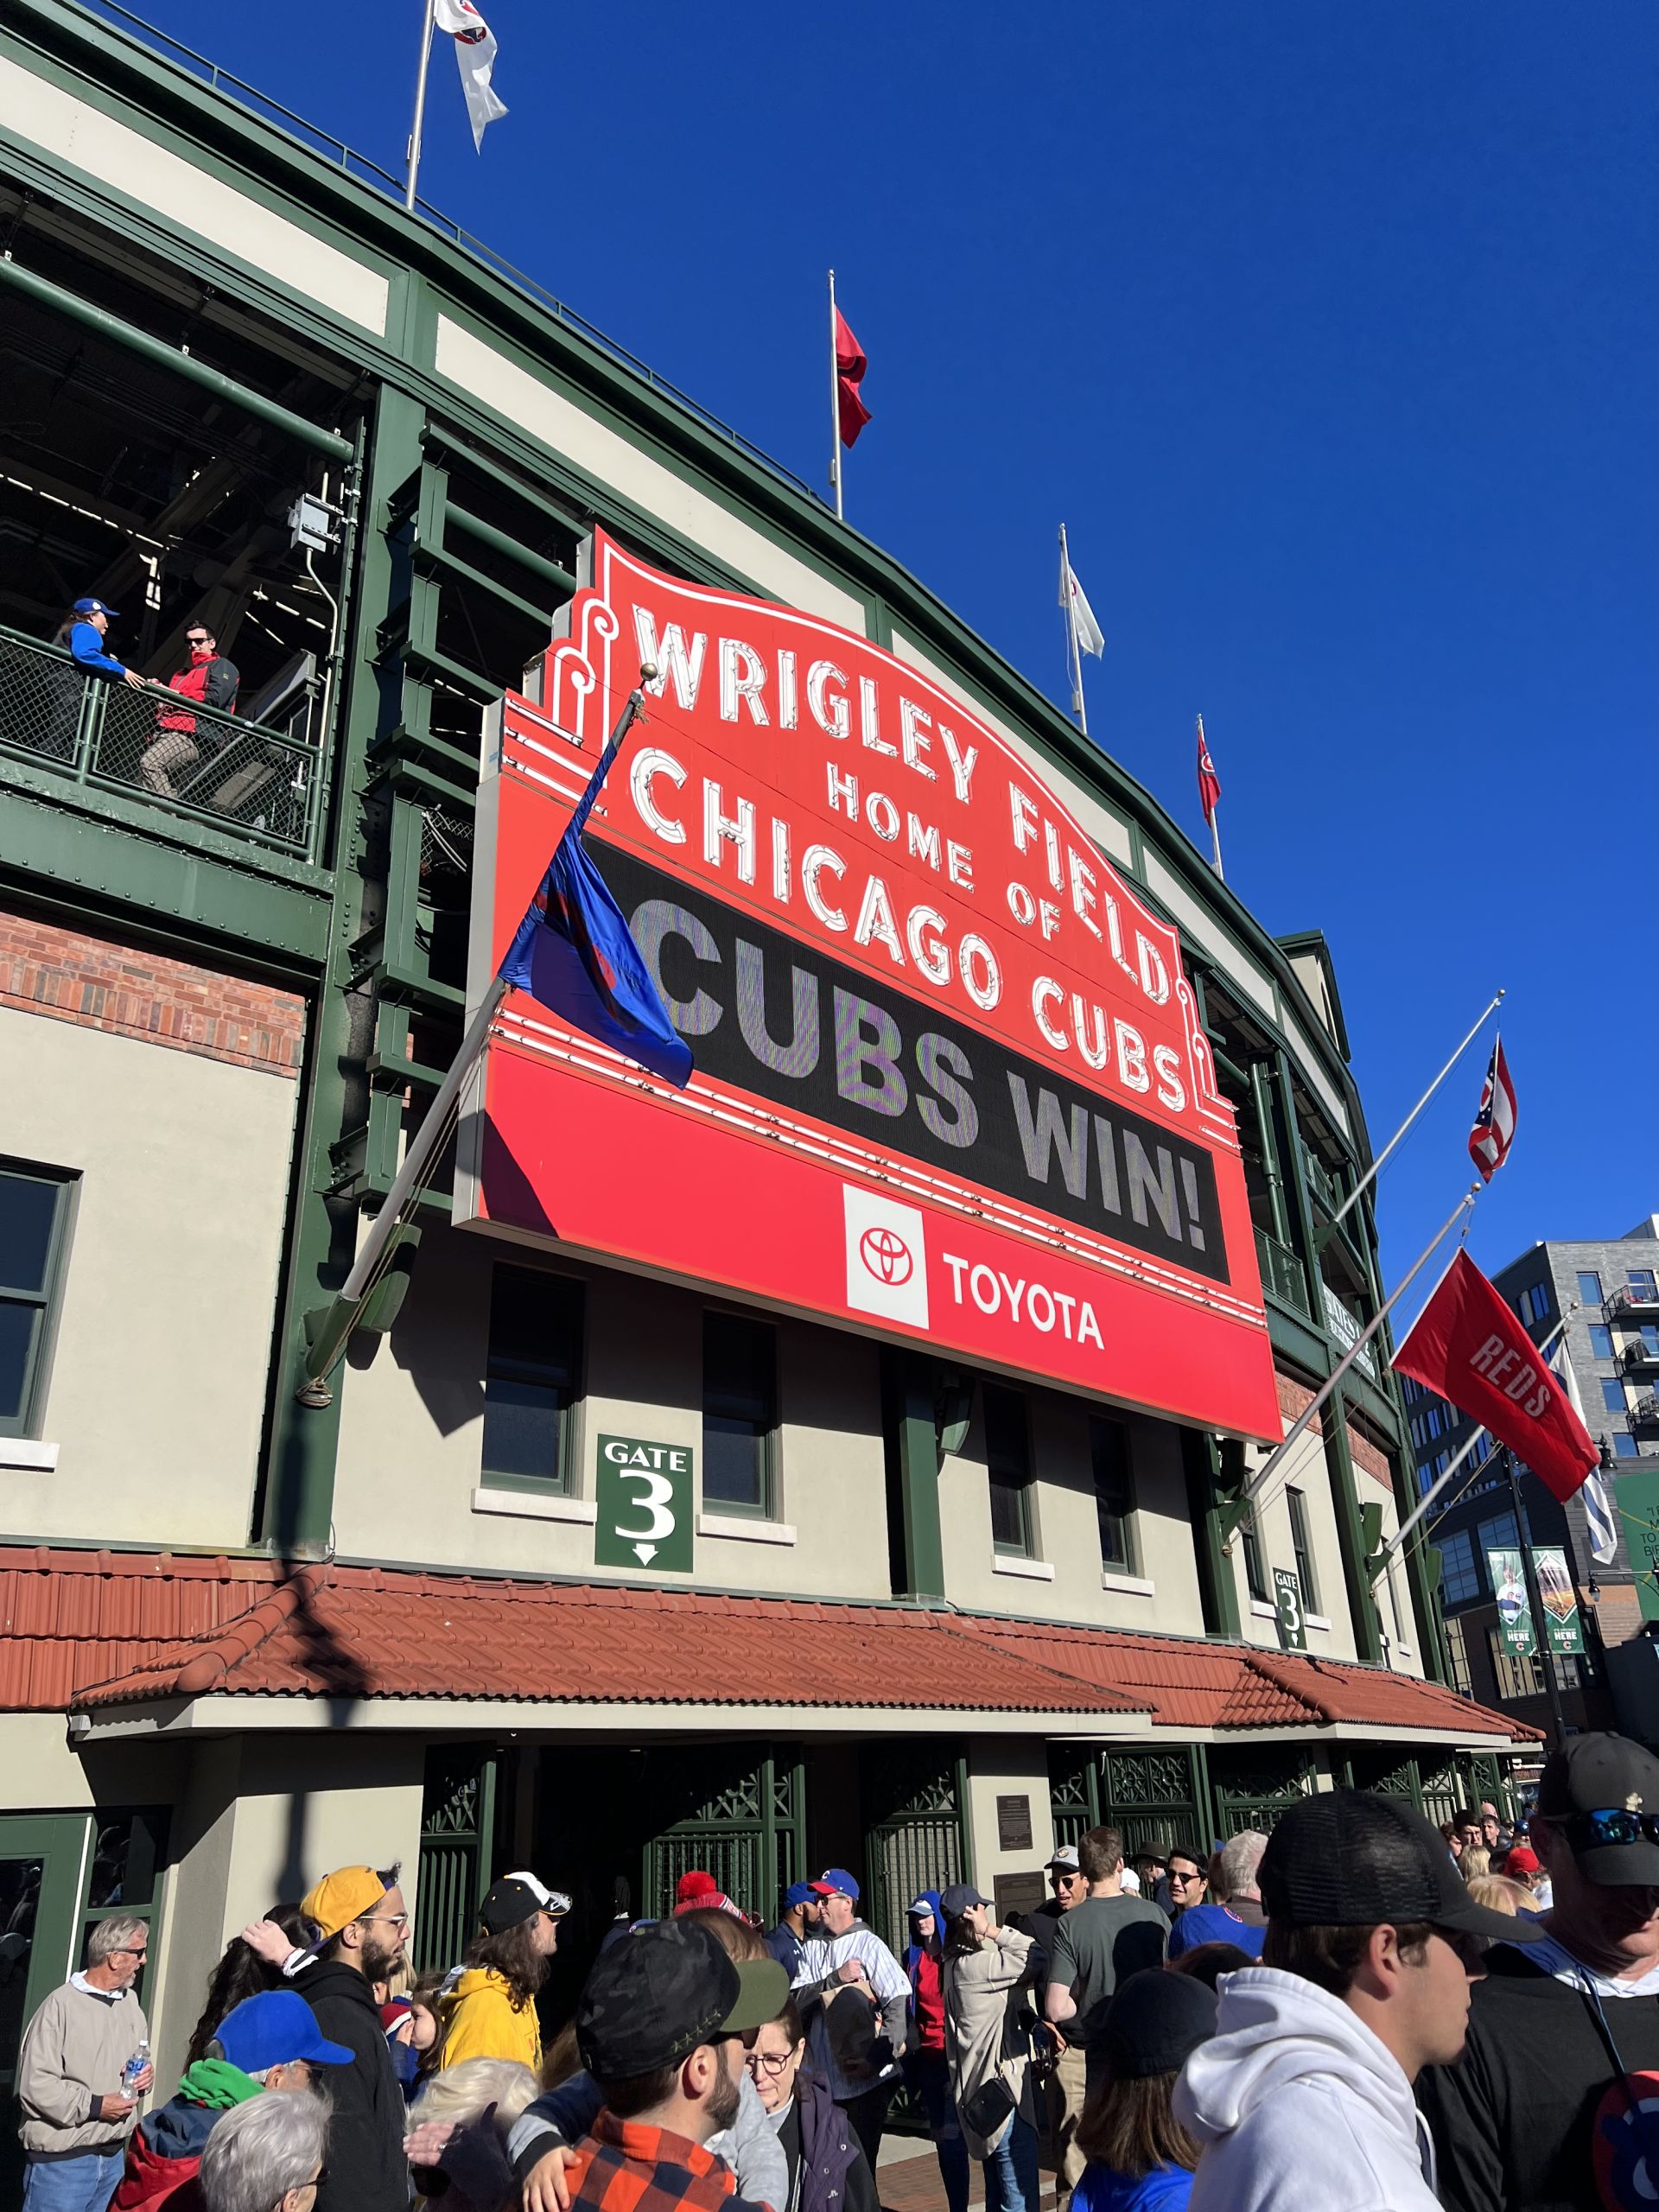 Wrigley Field: A local's guide to enjoying a road trip to the home